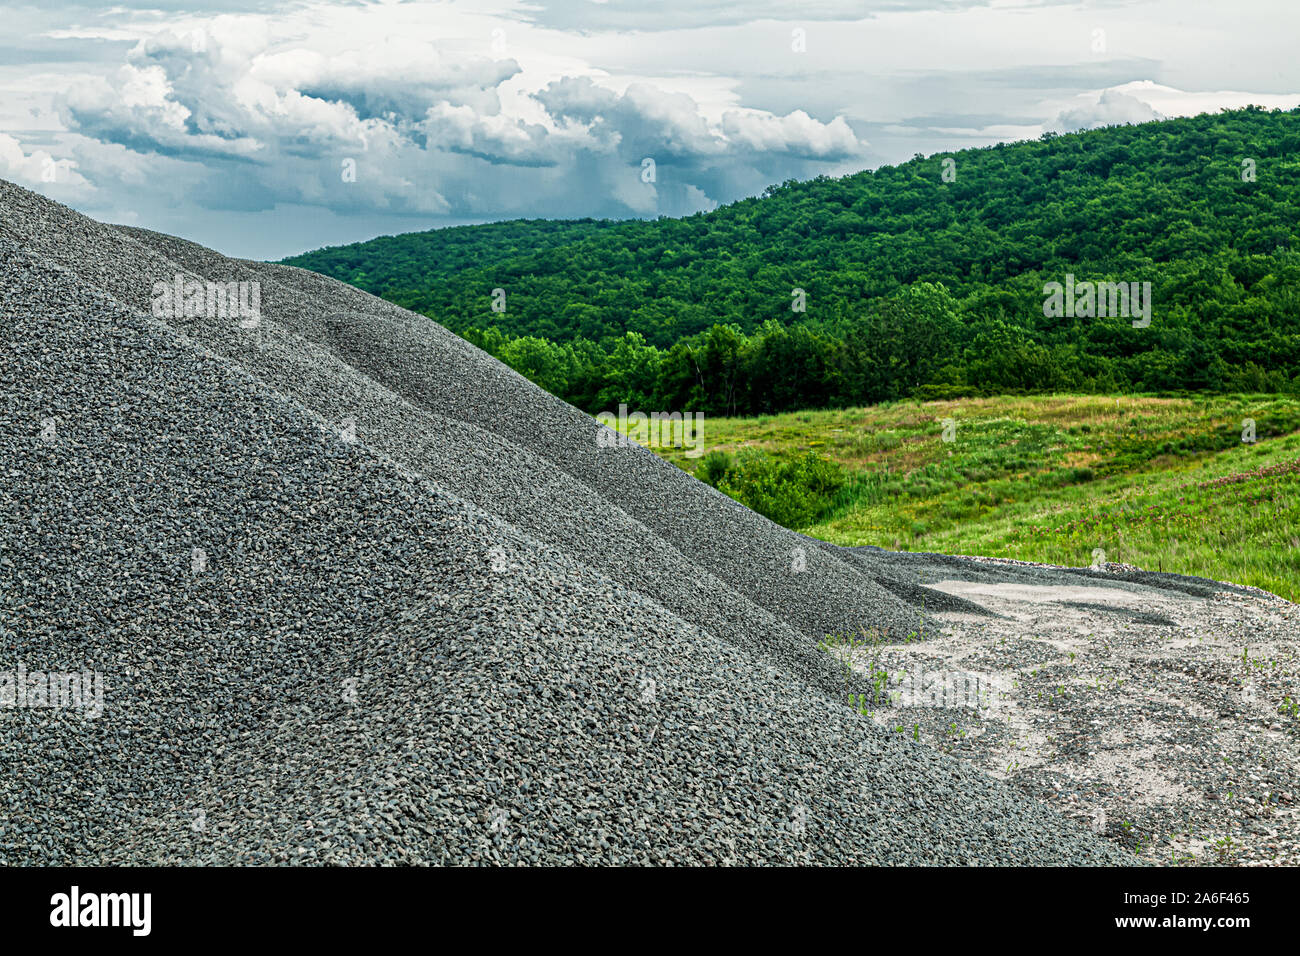 Piles of gravel in front of a lush scenic background Stock Photo